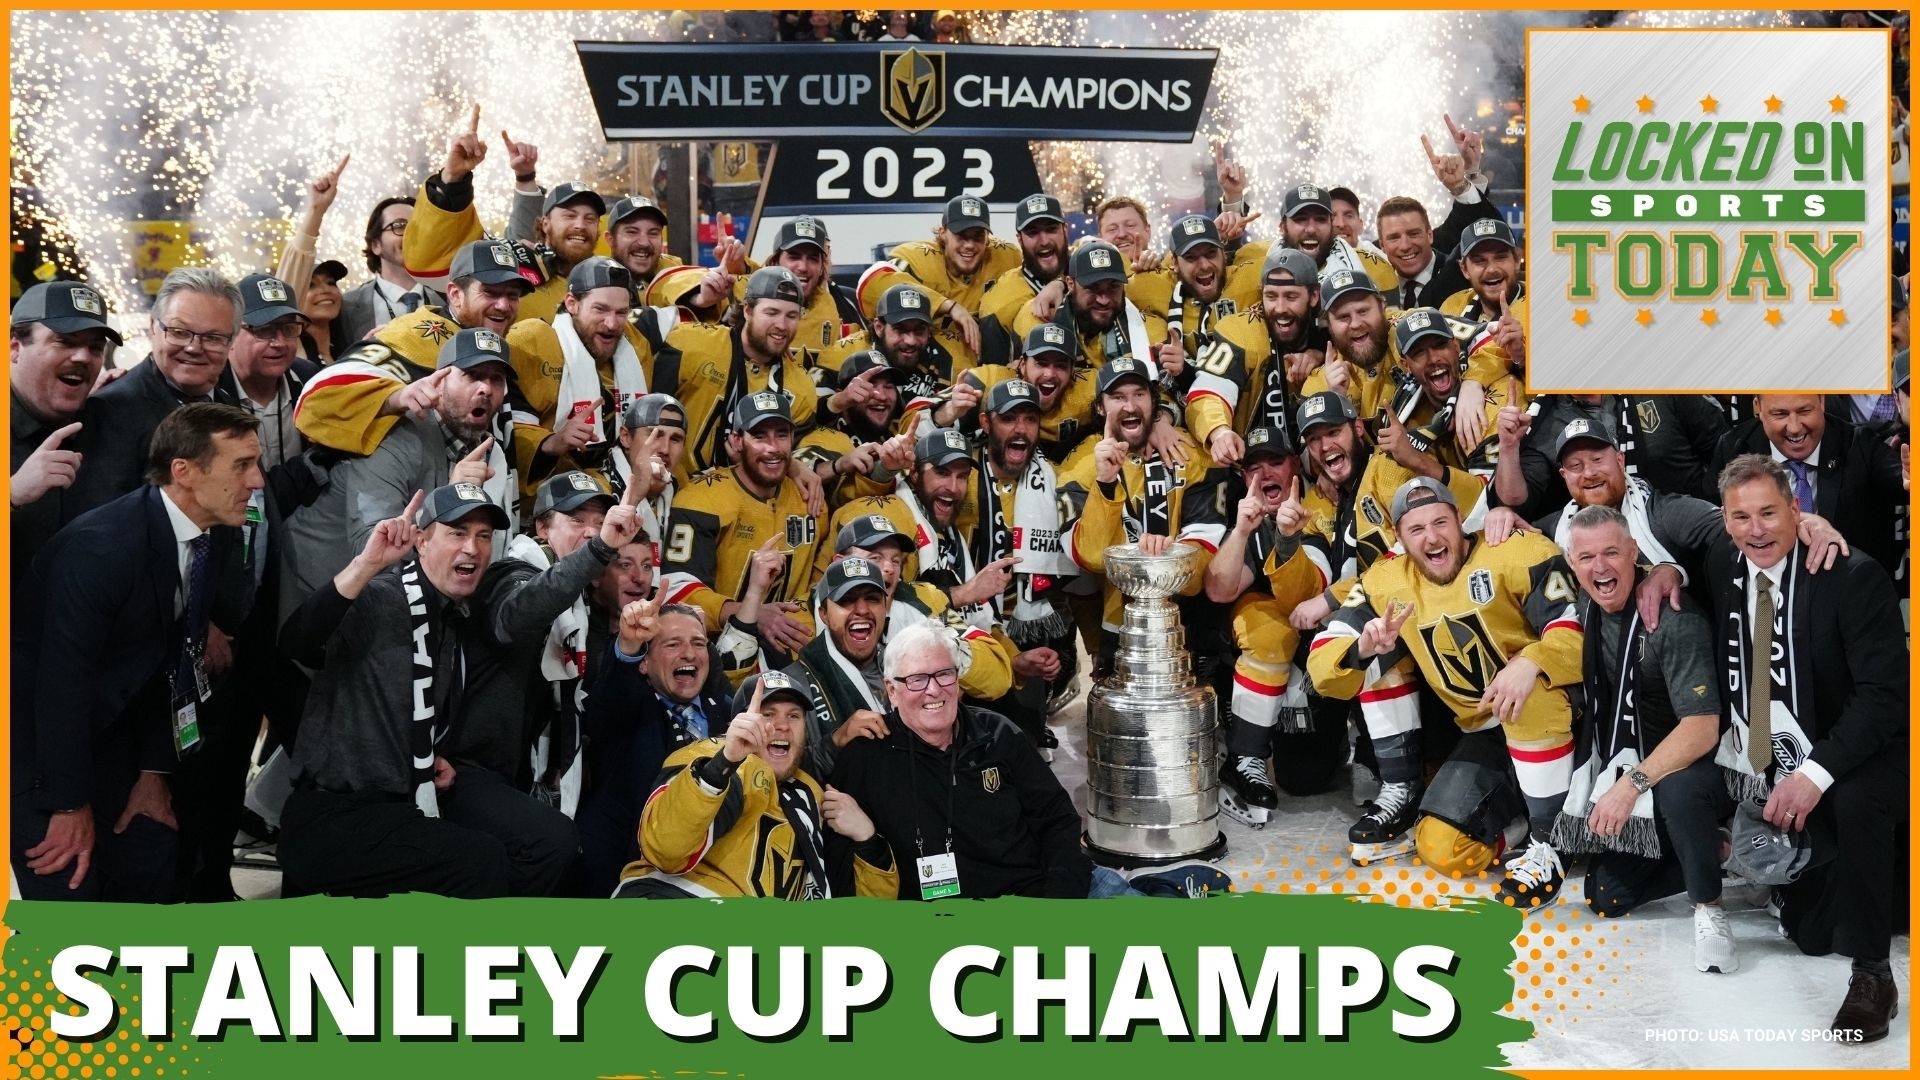 Discussing the day's top sports stories from the Golden Knights getting their first Stanley Cup win in the NHL to what is happening with the A's ownership.